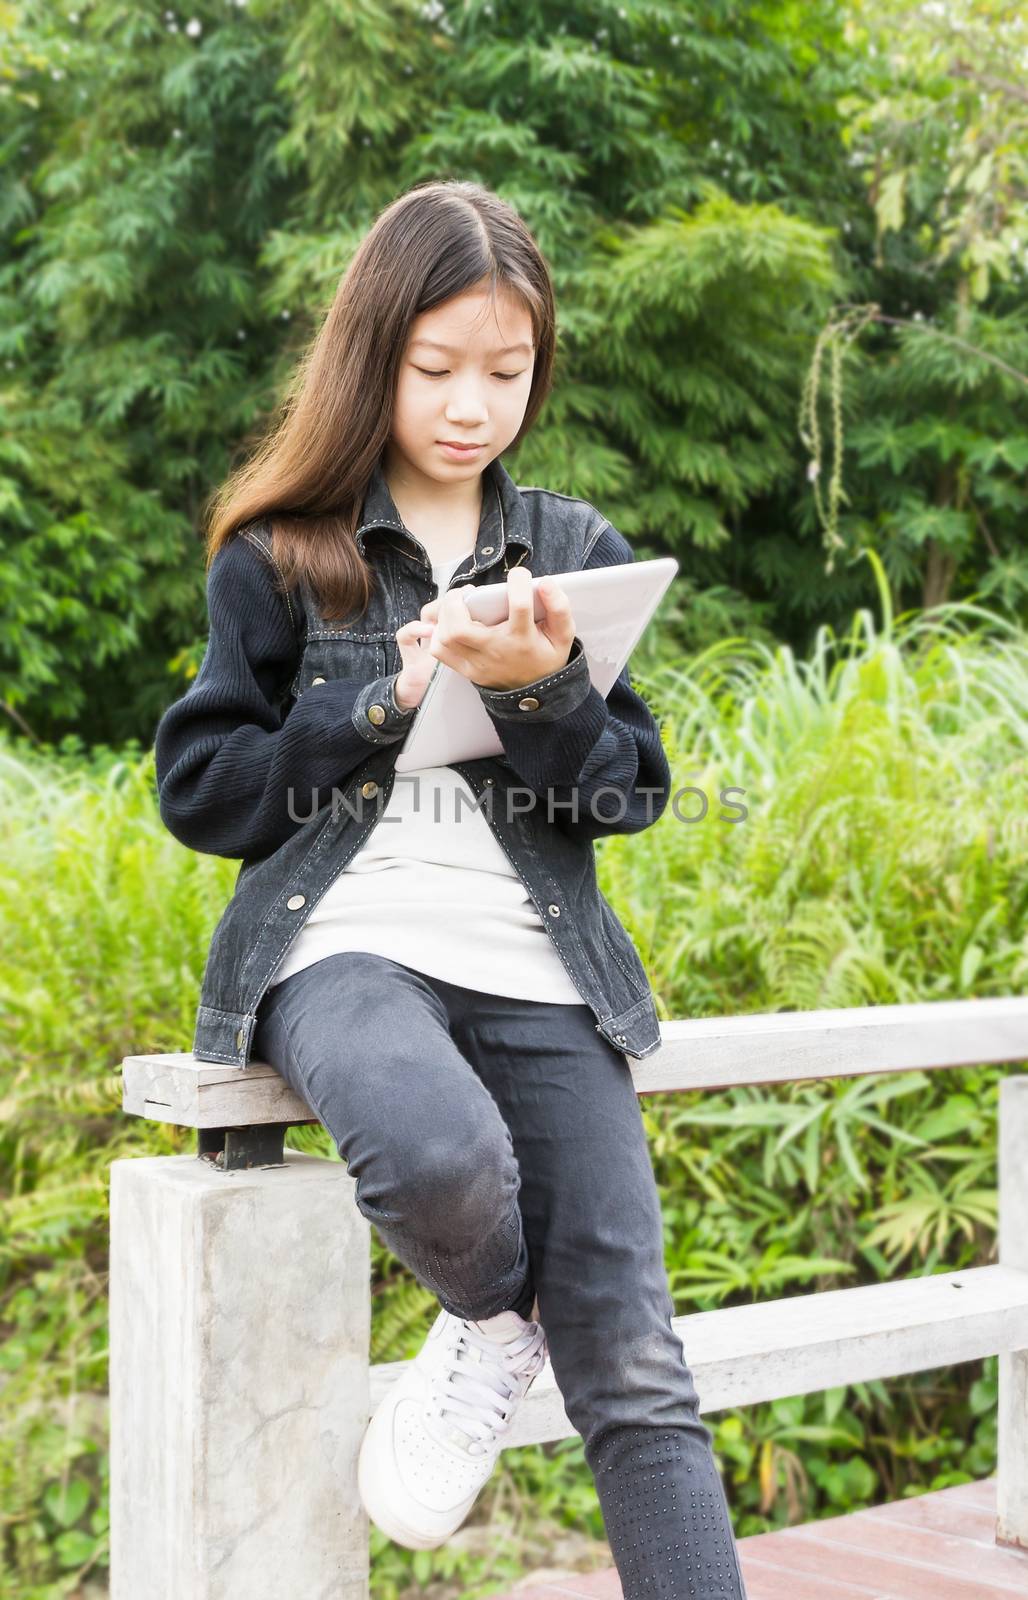 A young girl using tablet computer in park by stoonn